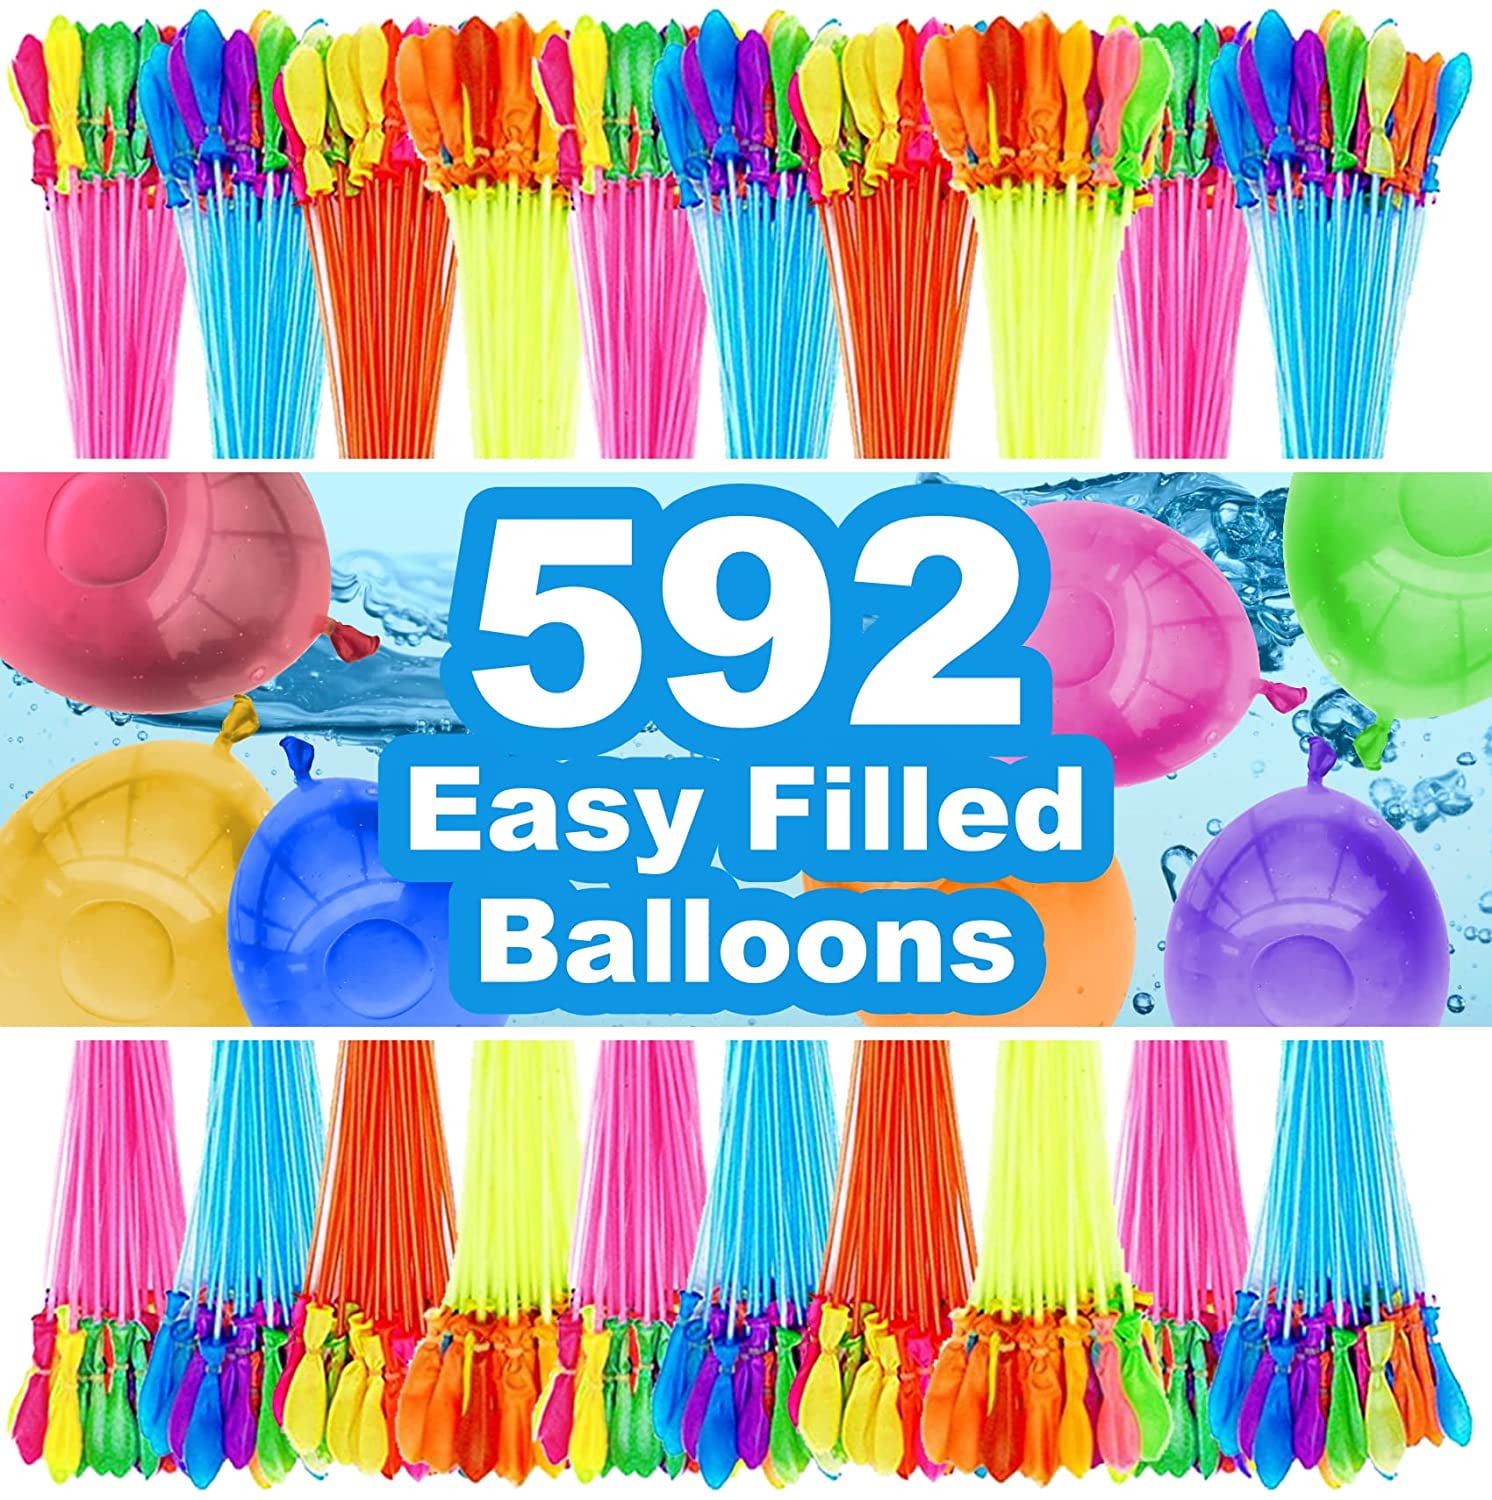 Water Balloons for Kids Girls Boys Balloons Set Quick Fill 666 Balloons 18 Bunches for Party Games Swimming Pool Outdoor Summer Fun 18 Bunch -40 